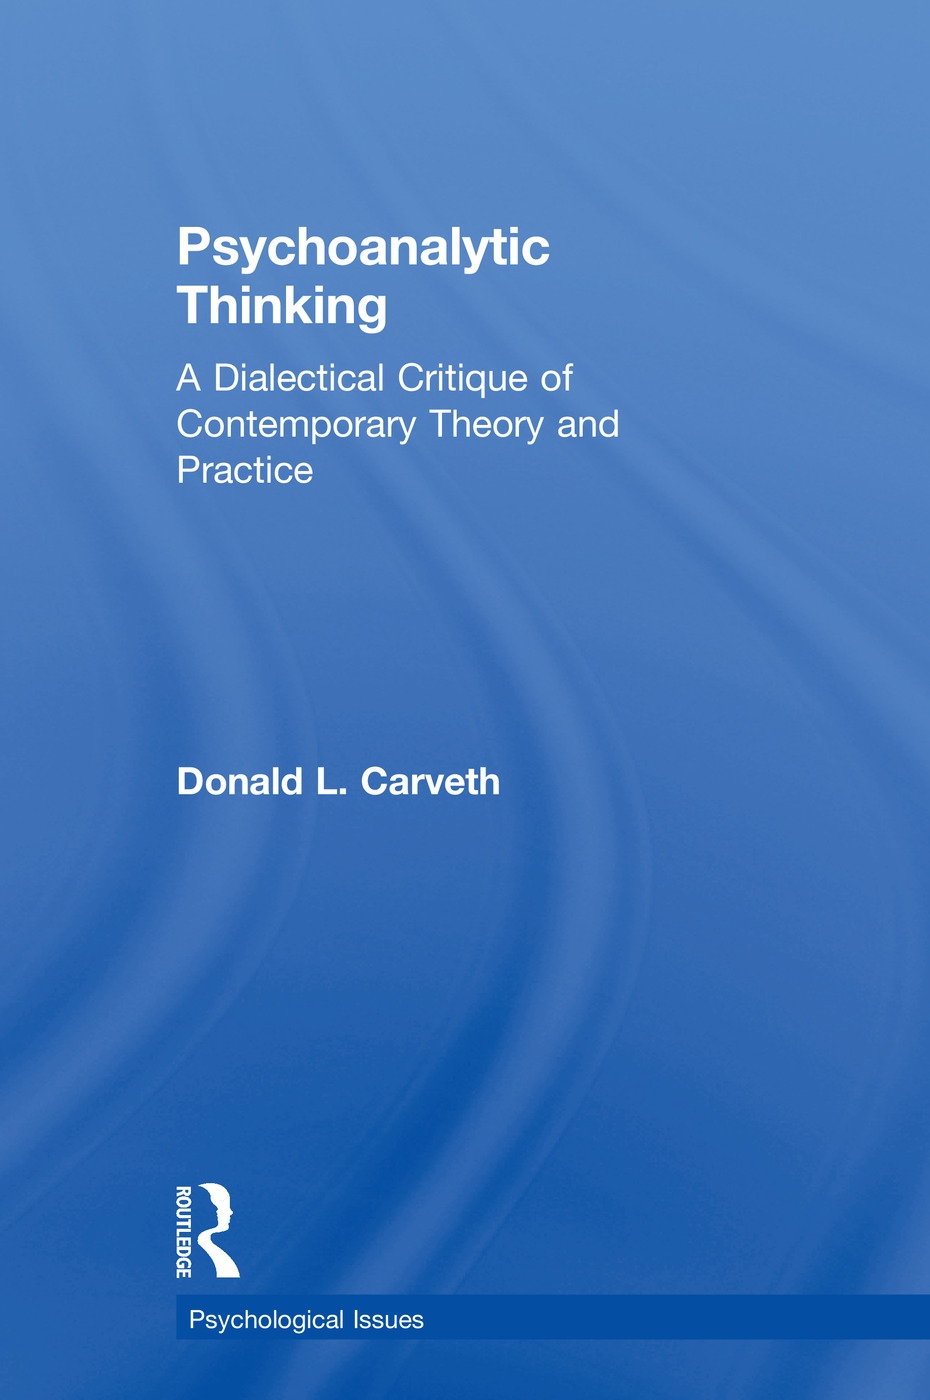 Psychoanalytic Thinking: A Dialectical Critique of Contemporary Theory and Practice